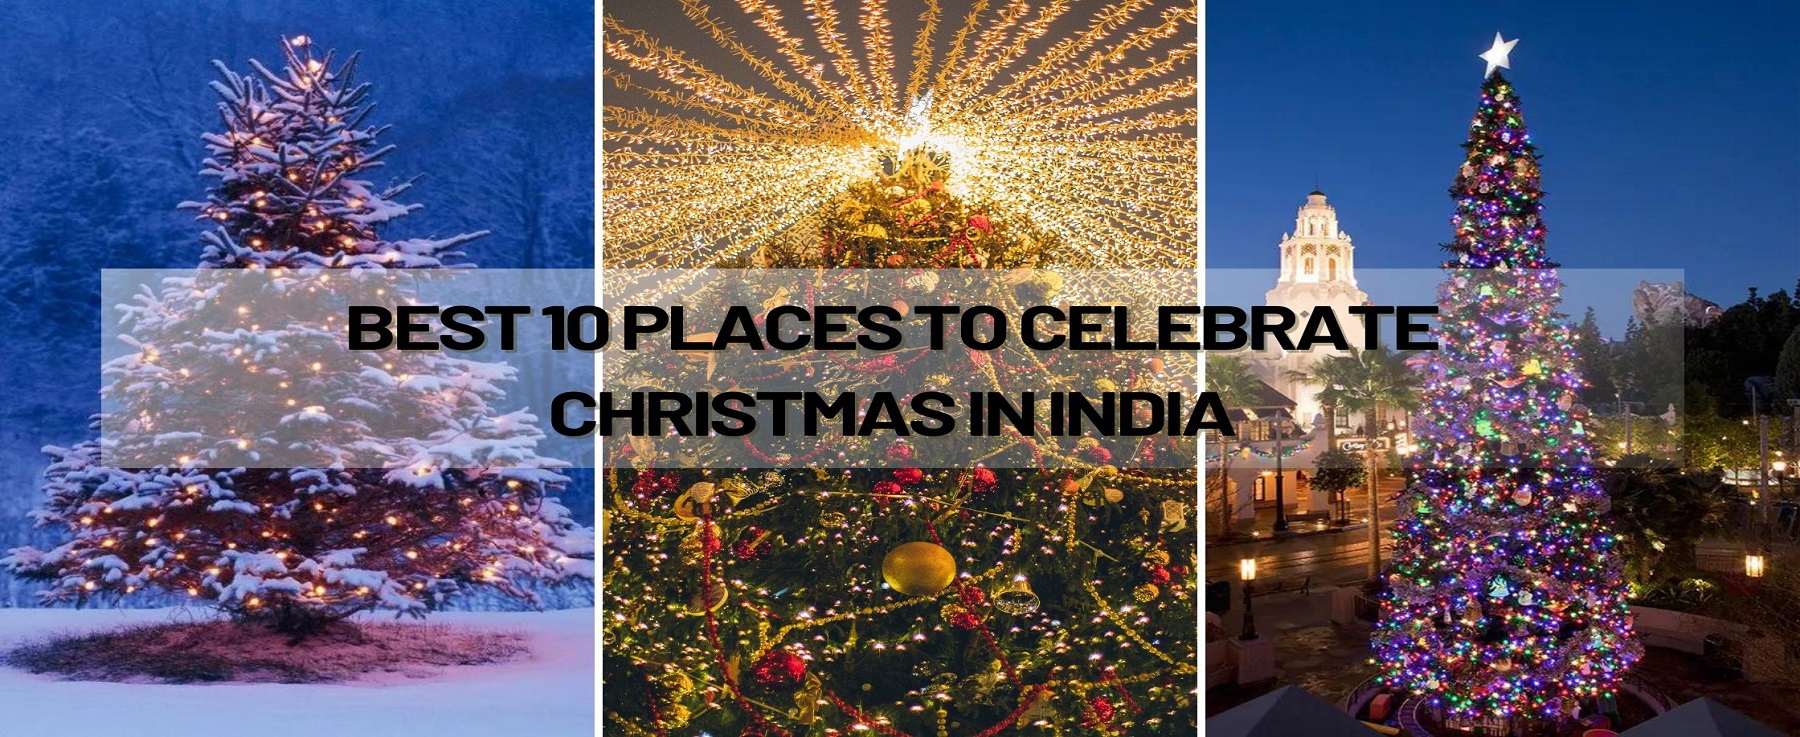 Best 10 Places To Celebrate Christmas In India